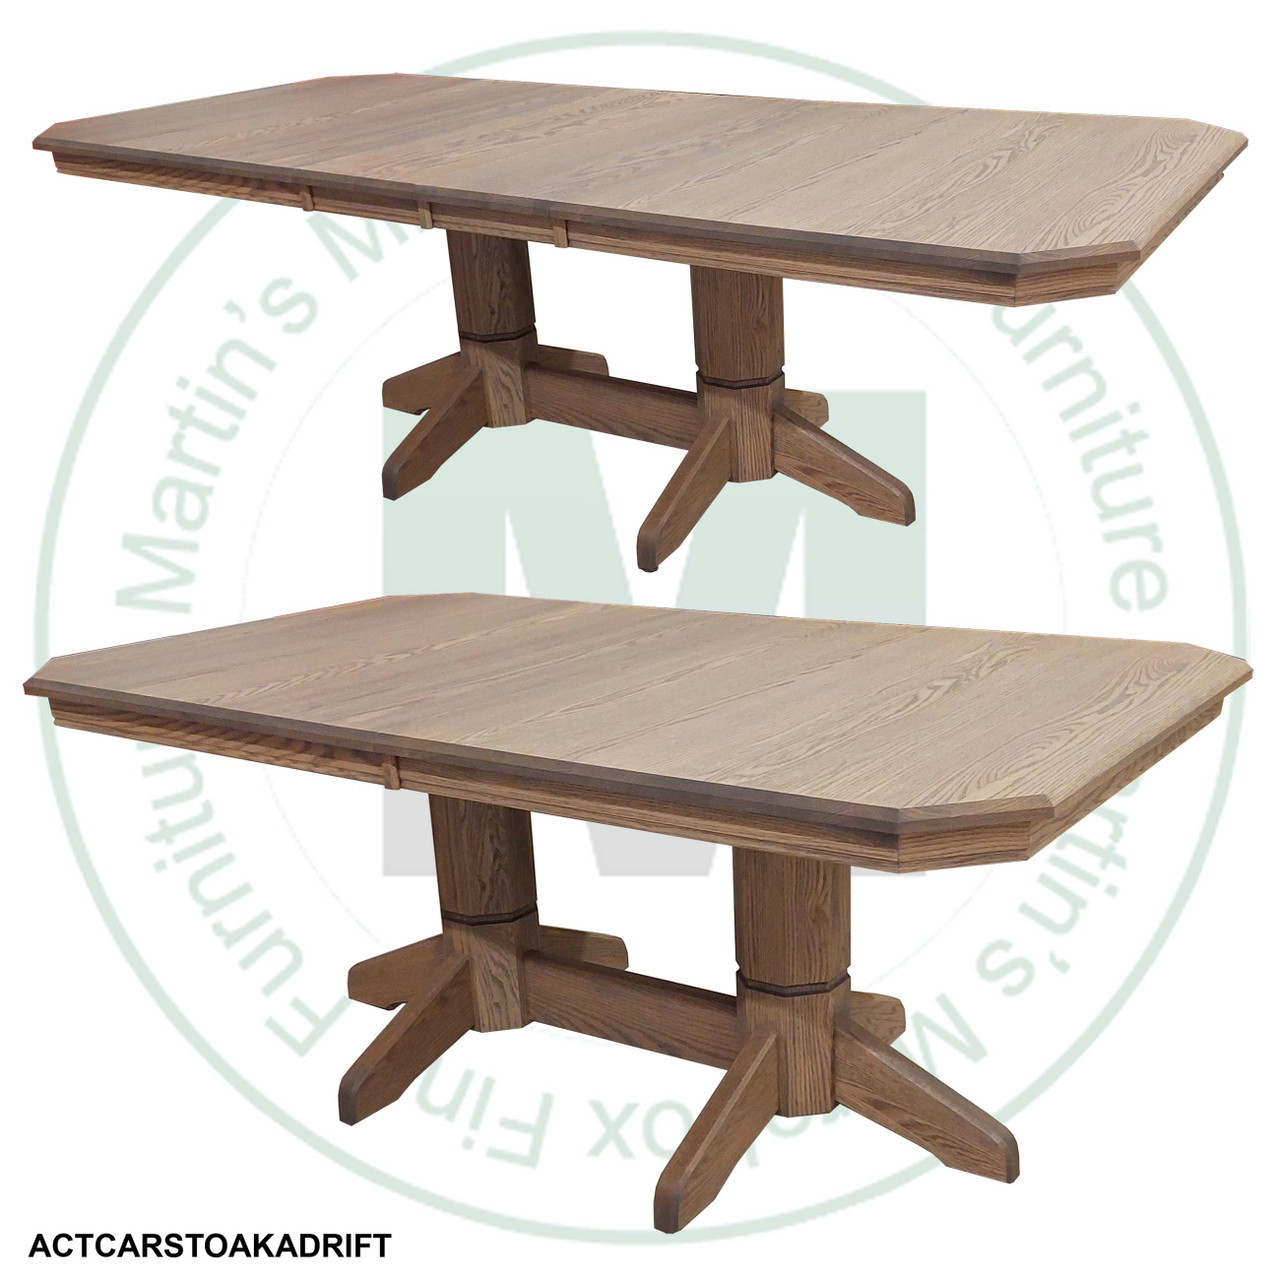 Maple Urban Classic Double Pedestal Table 42''D x 84''W x 30''H With 2 - 12'' Leaves